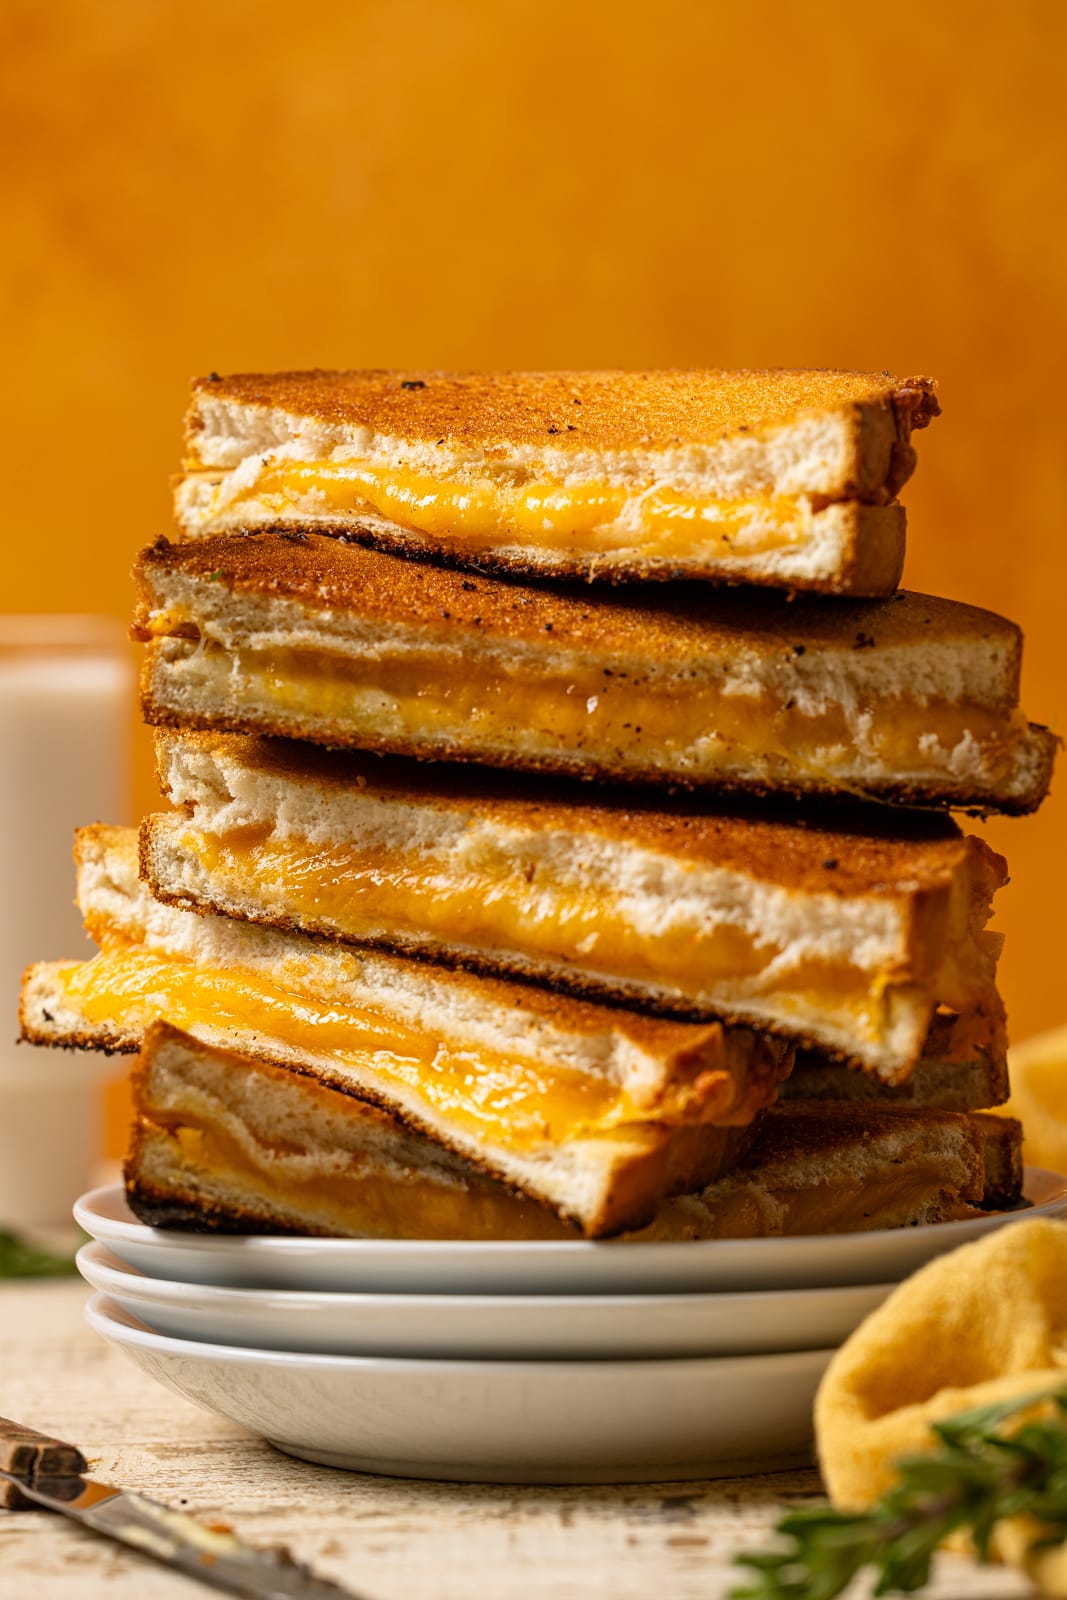 Stack on grilled cheese on white plates with an orange background.